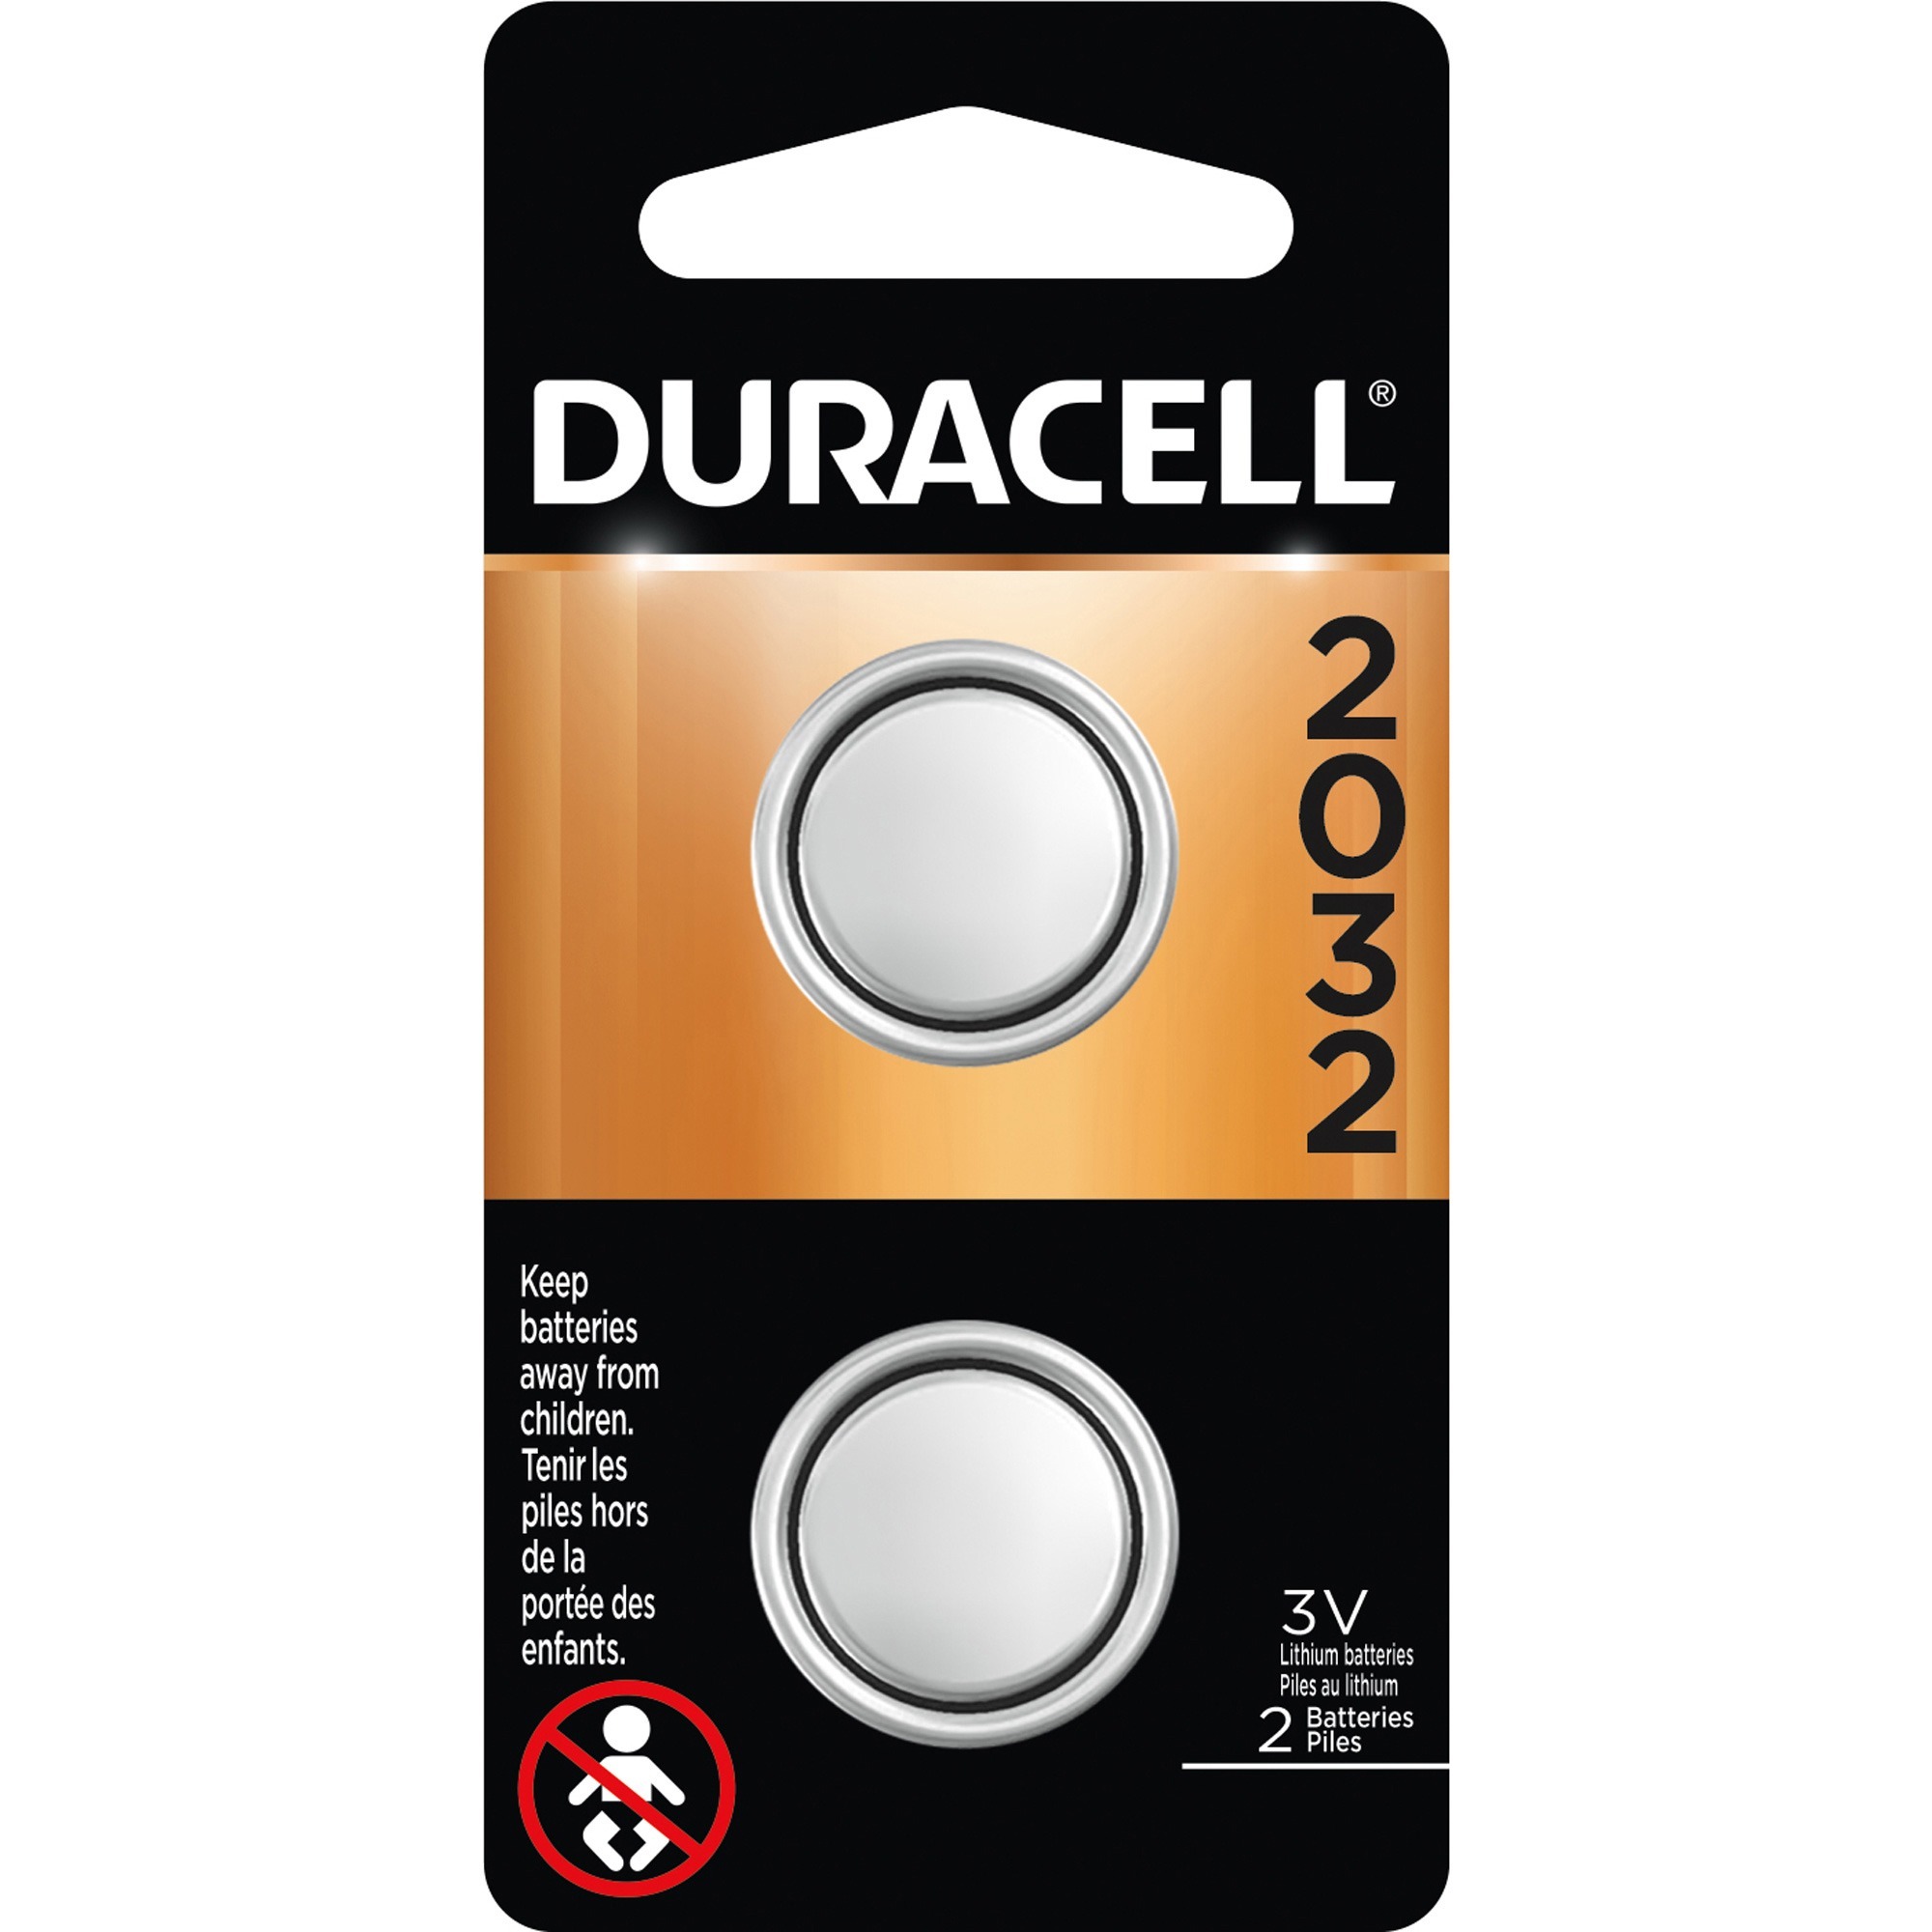 Duracell CR2032 3V Lithium Battery, 8 ct.